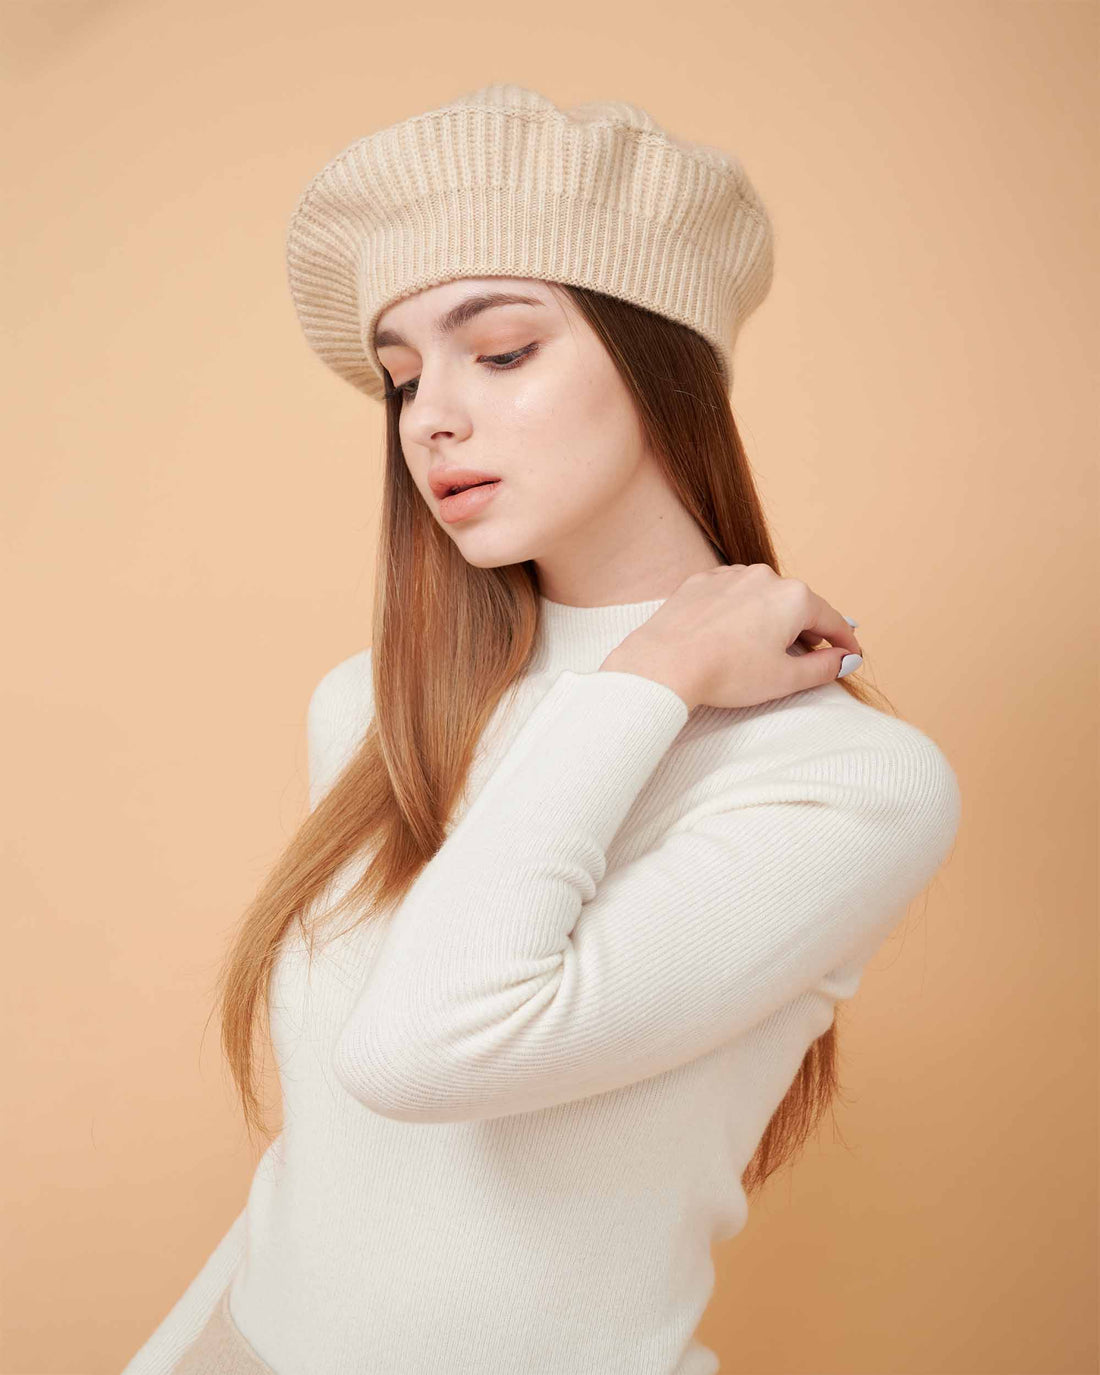 Cashmere Hat , High Quality Hat , Cashmere Beige Hat , 100% Cashmere Hat , Hat For All Seasons , Made By Davinii , Side Image 